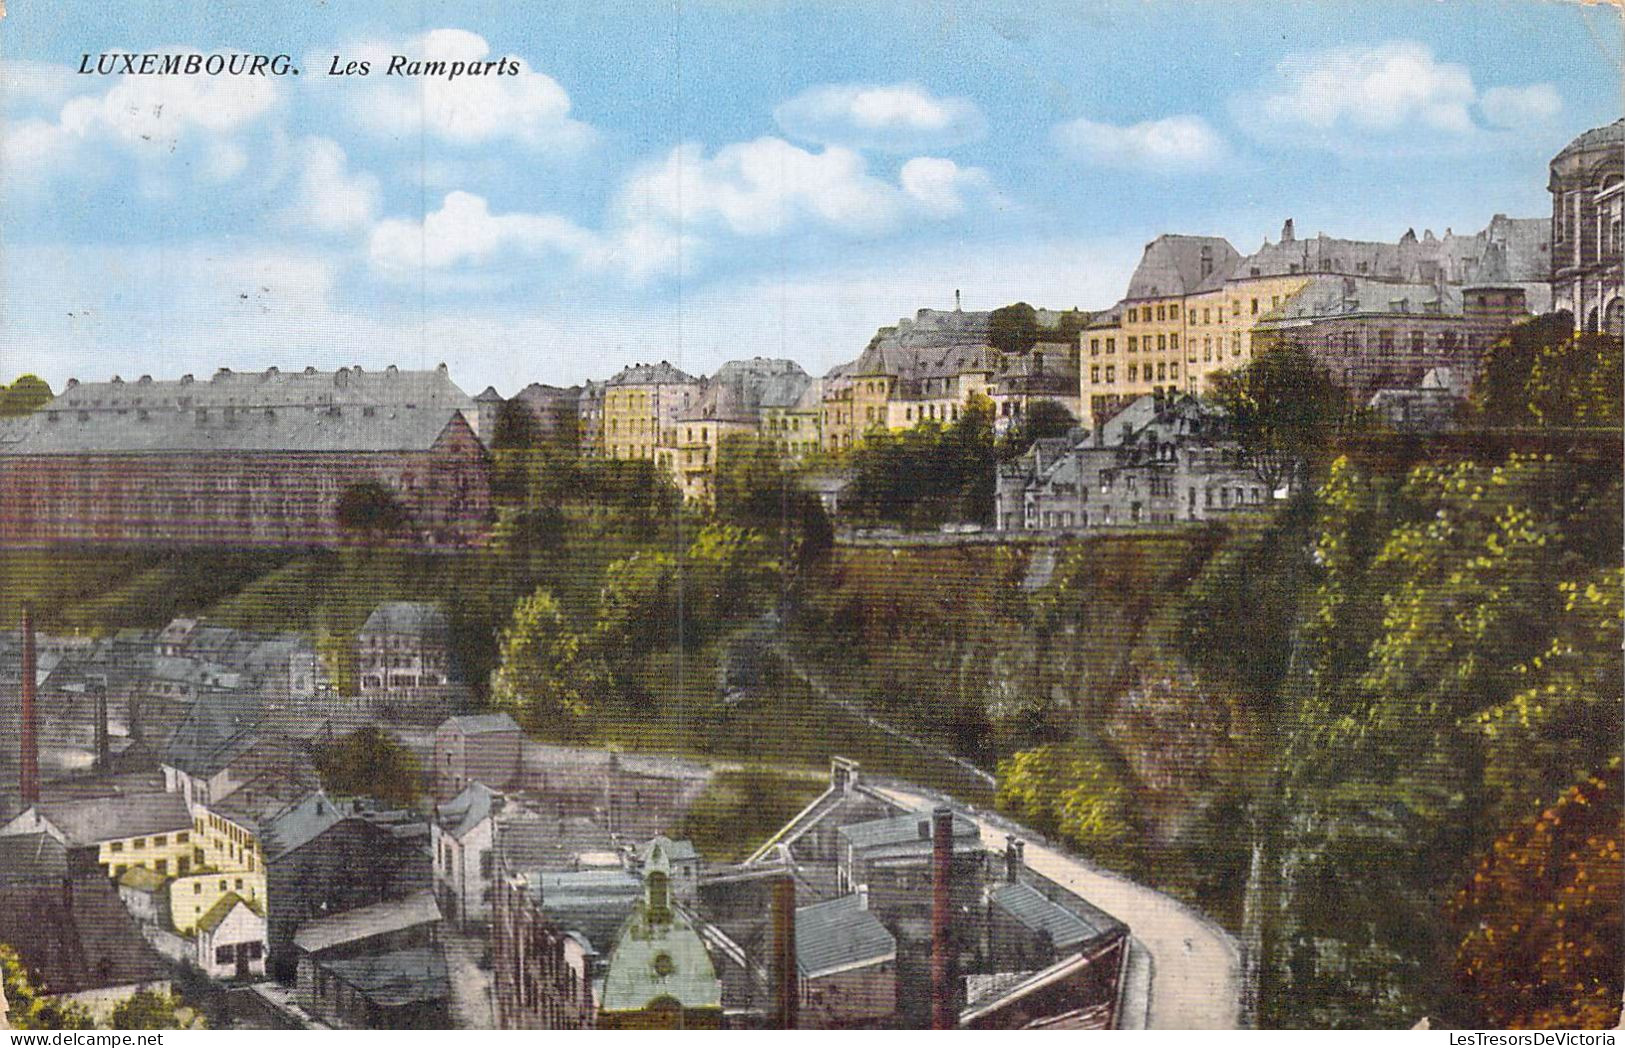 LUXEMBOURG - Les Ramparts - Carte Postale Ancienne - Luxemburg - Stad